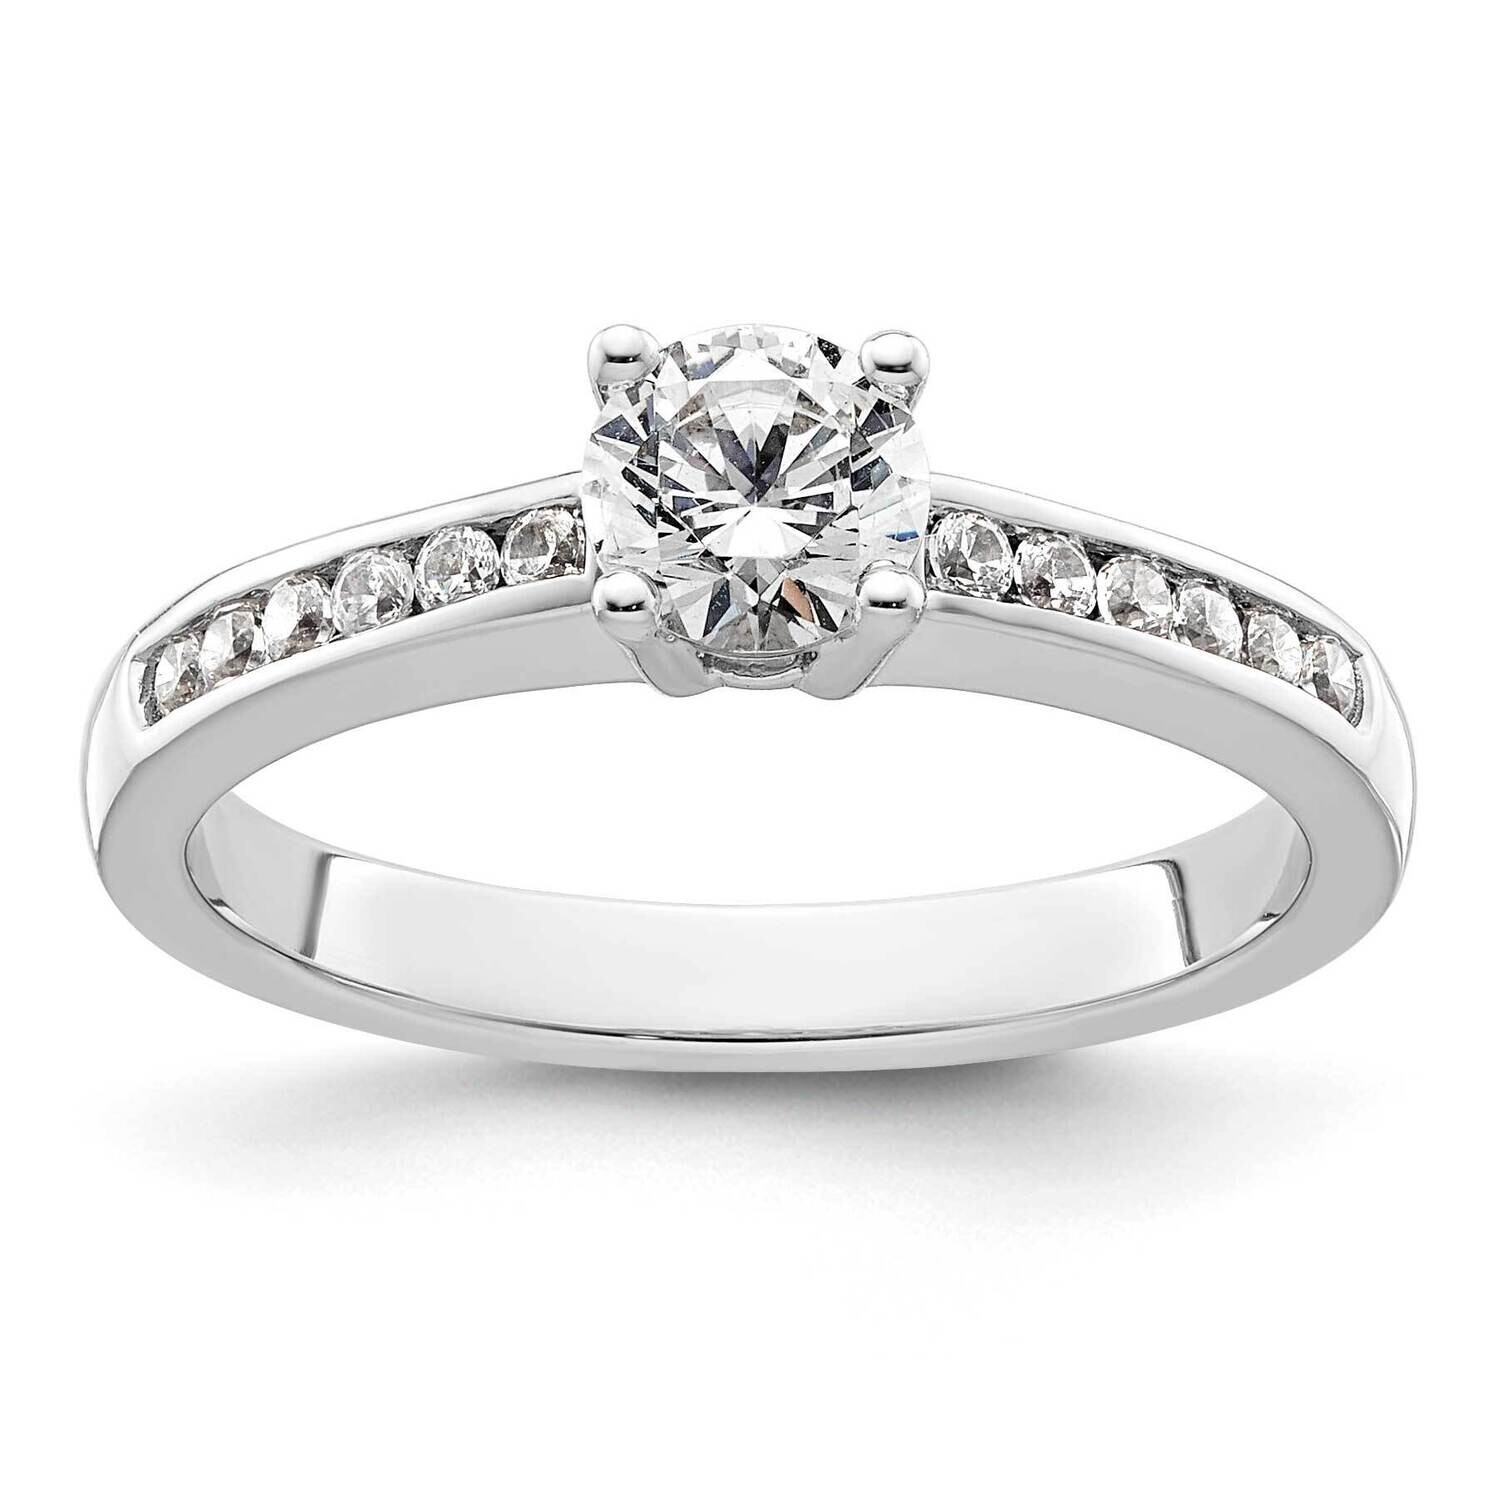 Diamond Si1/Si2 G H I Round Complete Eng Ring 14k White Gold RM2578E-050-WAA